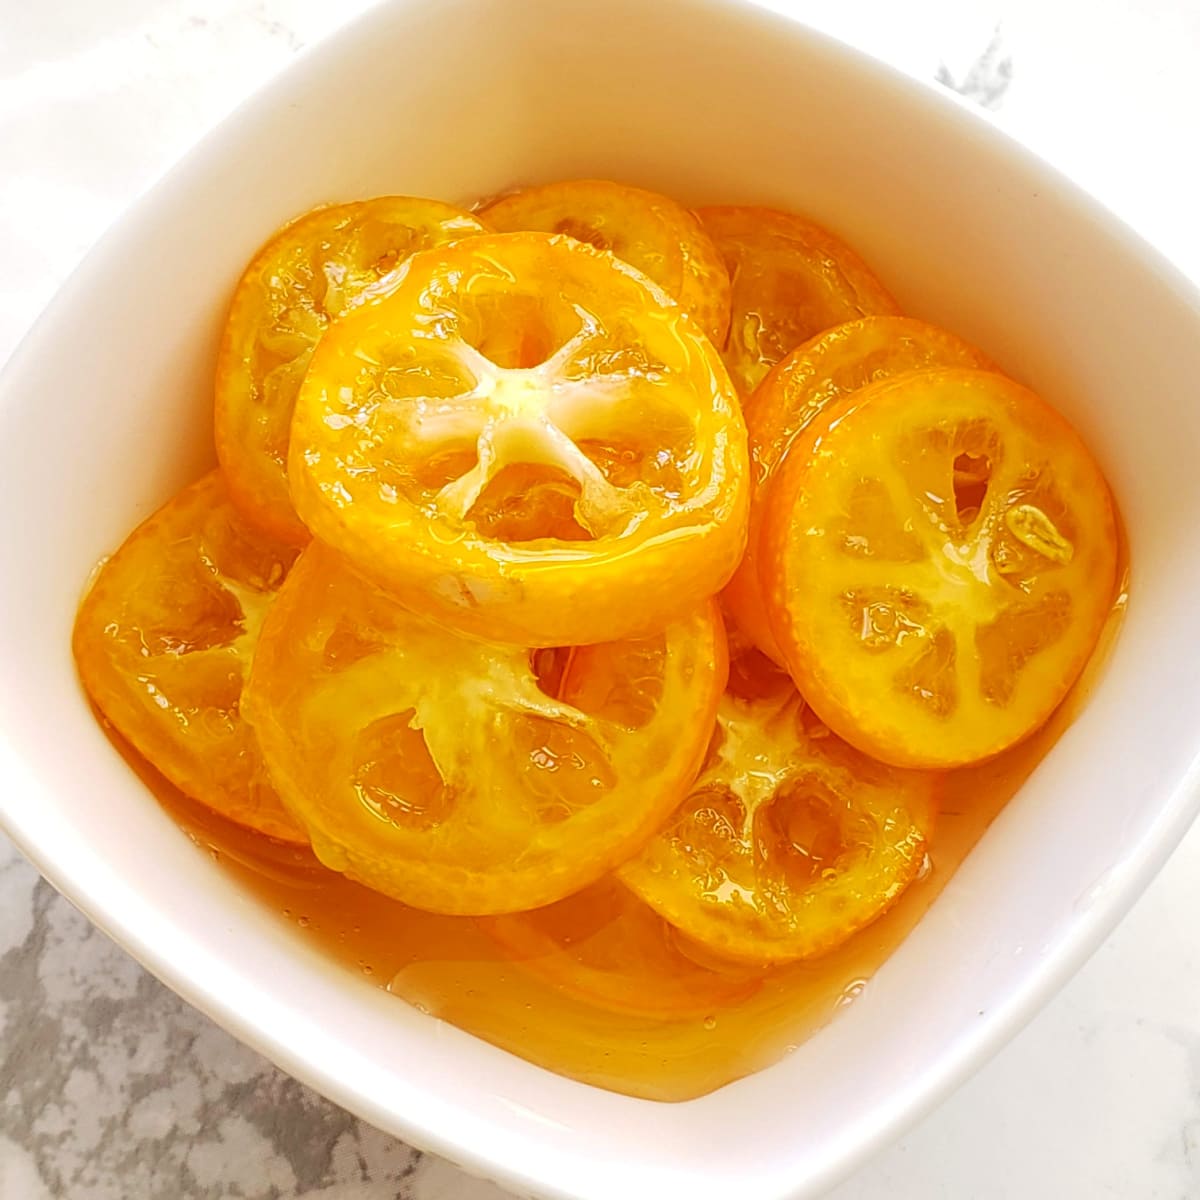 No-Cook Candied Kumquats are the tangy-sweet fruit treat you didn't know you needed. Thinly sliced kumquats soaked in honey to candy them -- that's all it takes!